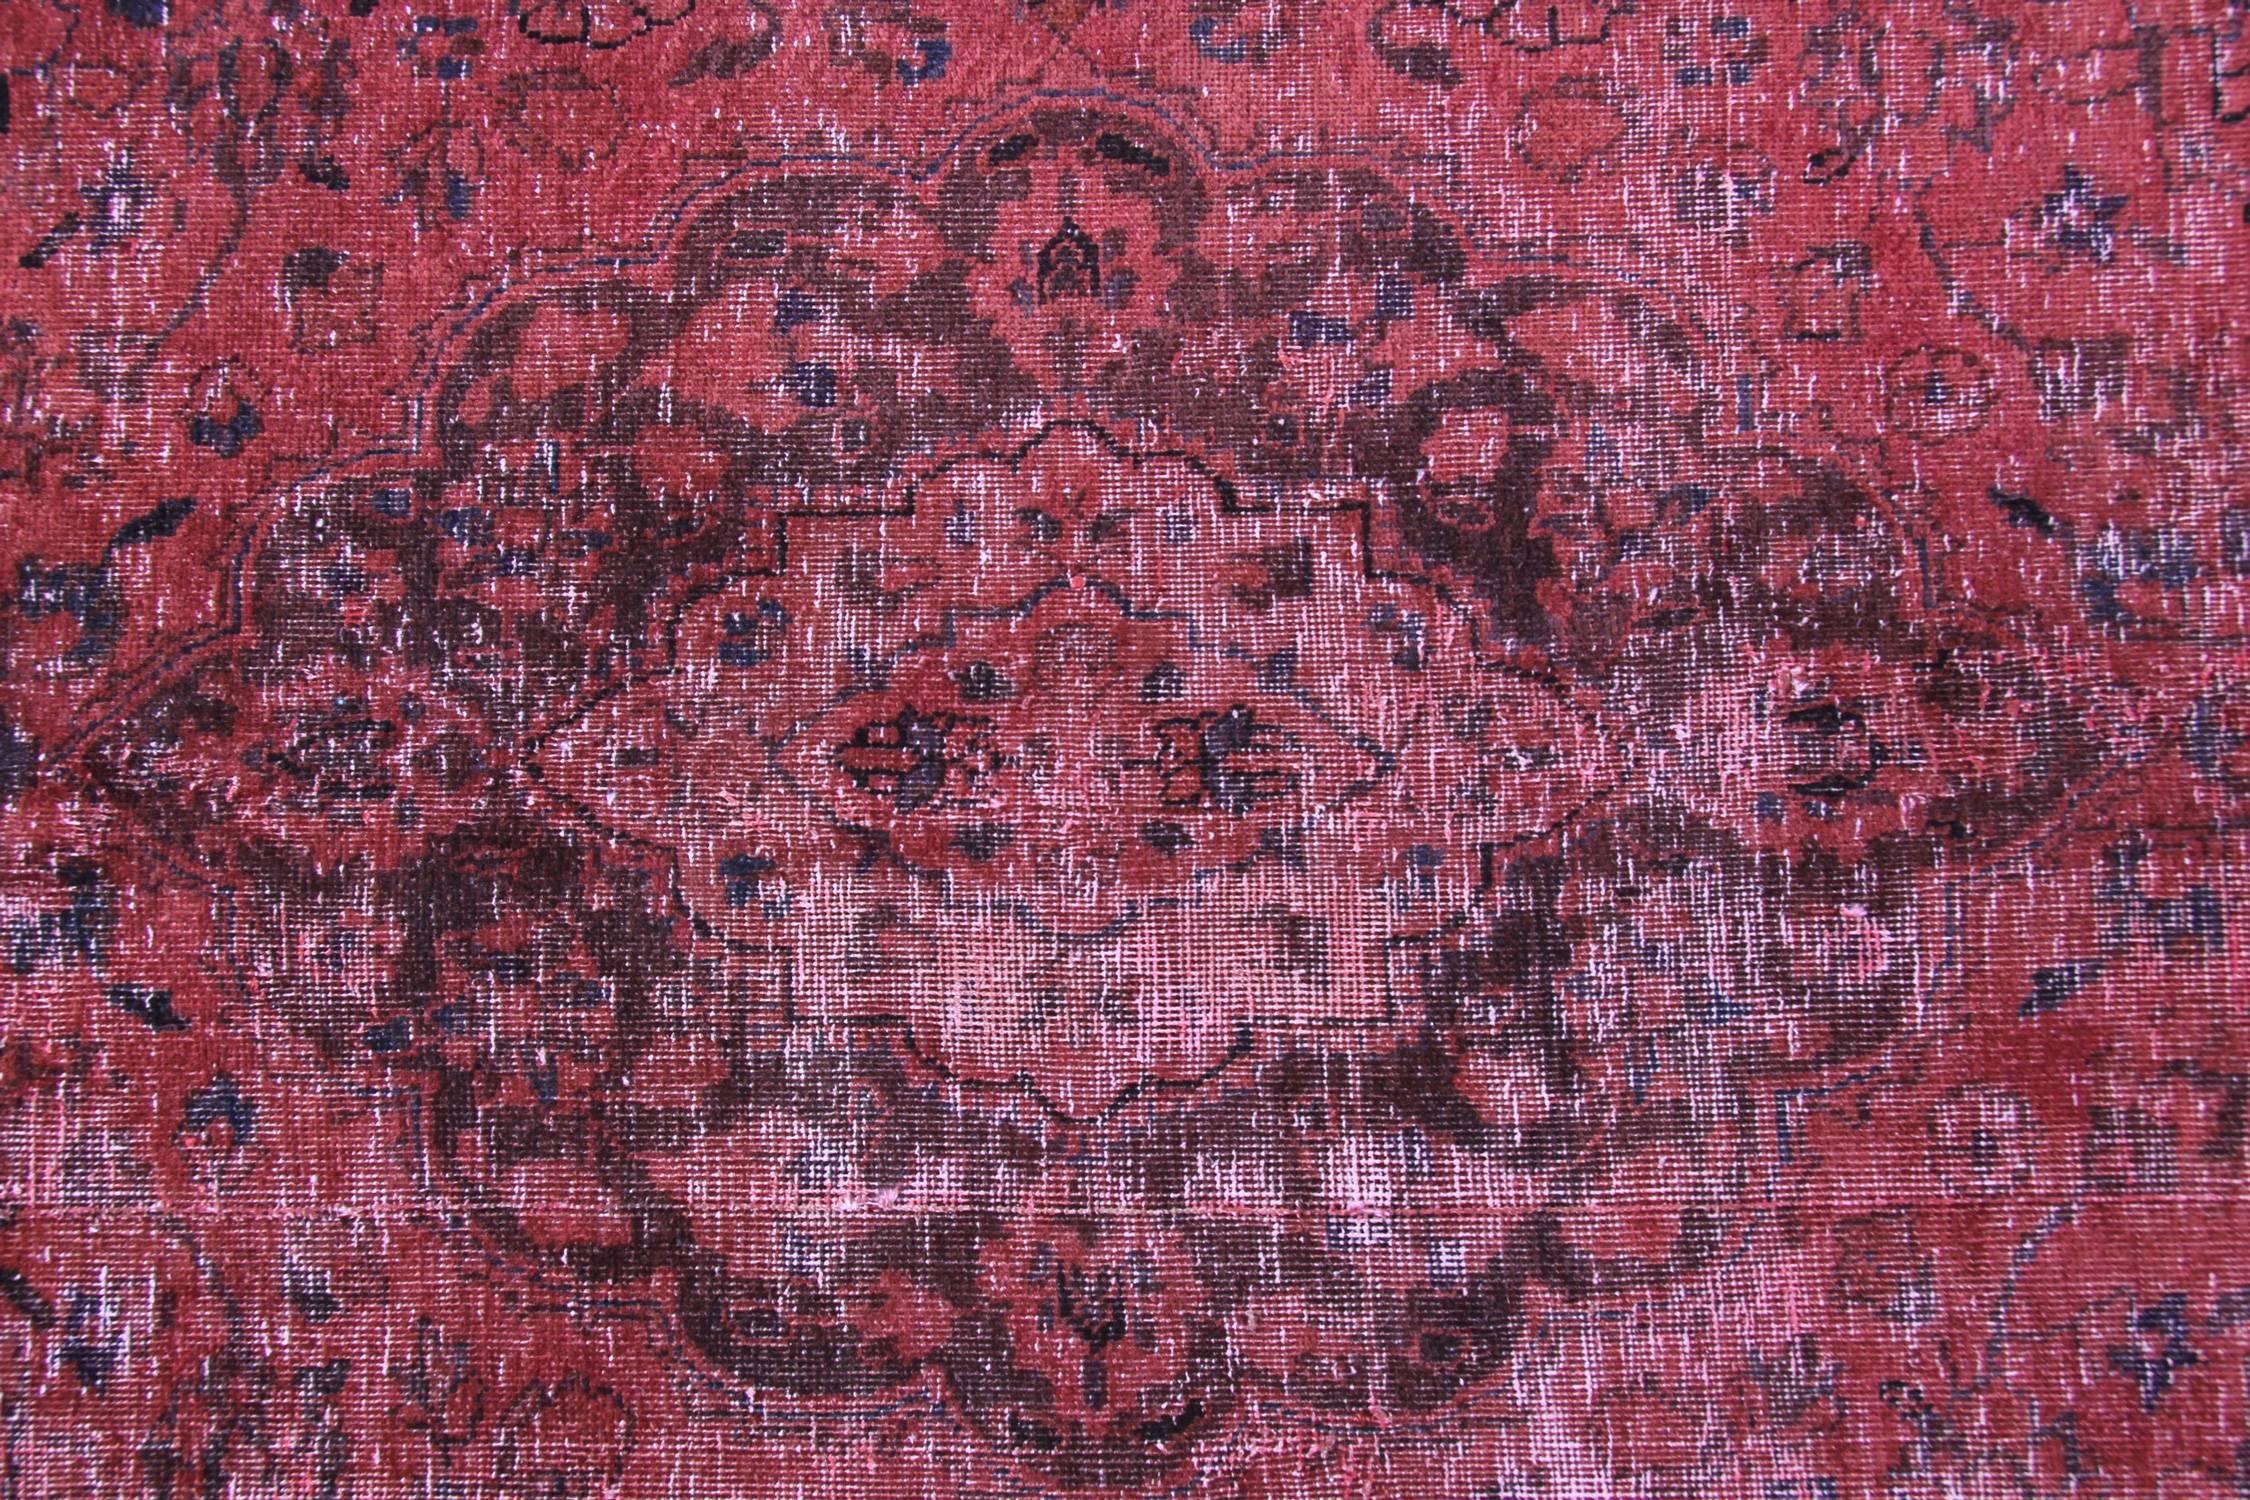 Revival Vintage Persian Rugs, Red Rug, Carpet from Iran